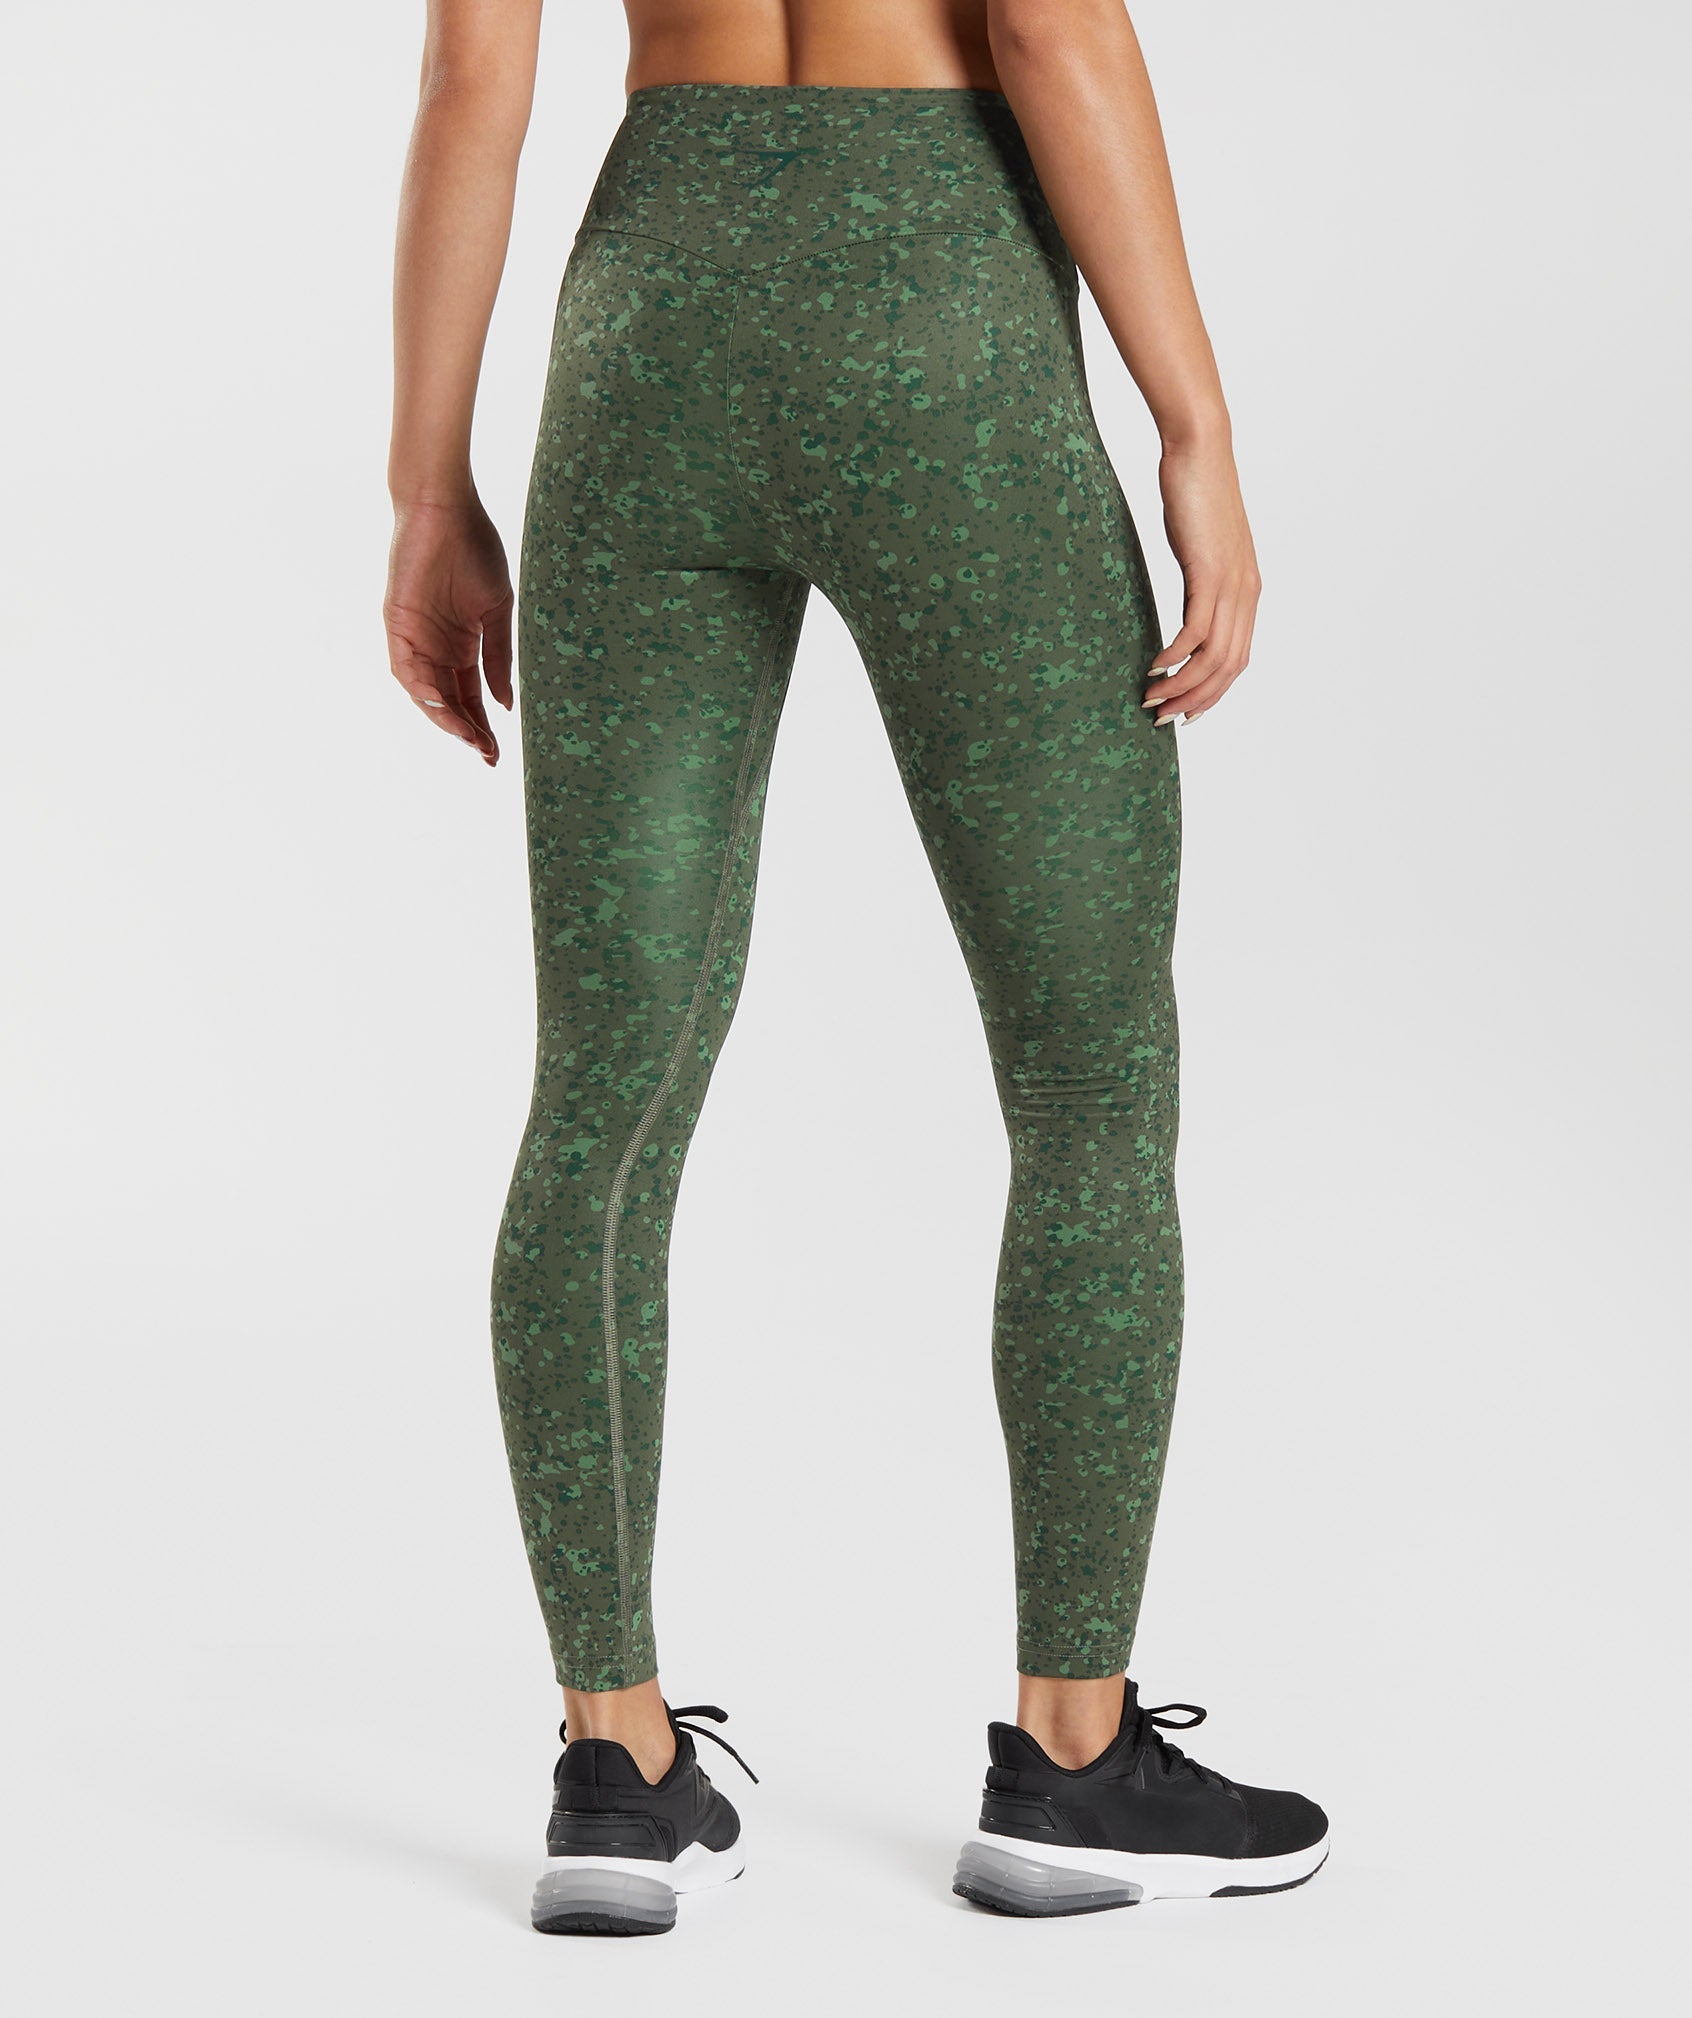 Mineral Print Leggings in Core Olive